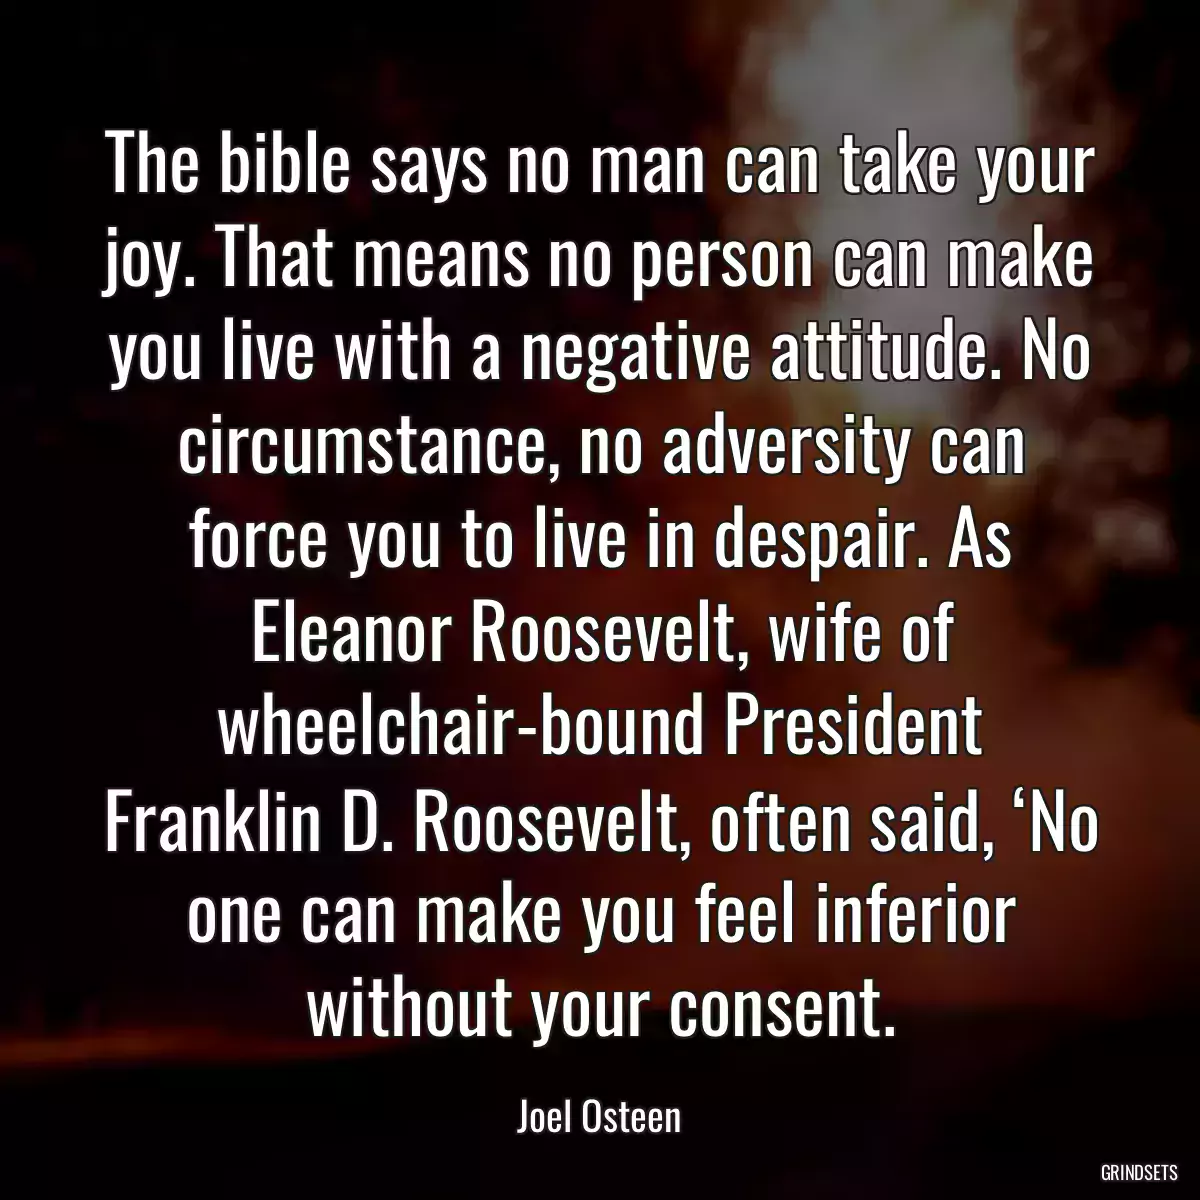 The bible says no man can take your joy. That means no person can make you live with a negative attitude. No circumstance, no adversity can force you to live in despair. As Eleanor Roosevelt, wife of wheelchair-bound President Franklin D. Roosevelt, often said, ‘No one can make you feel inferior without your consent.